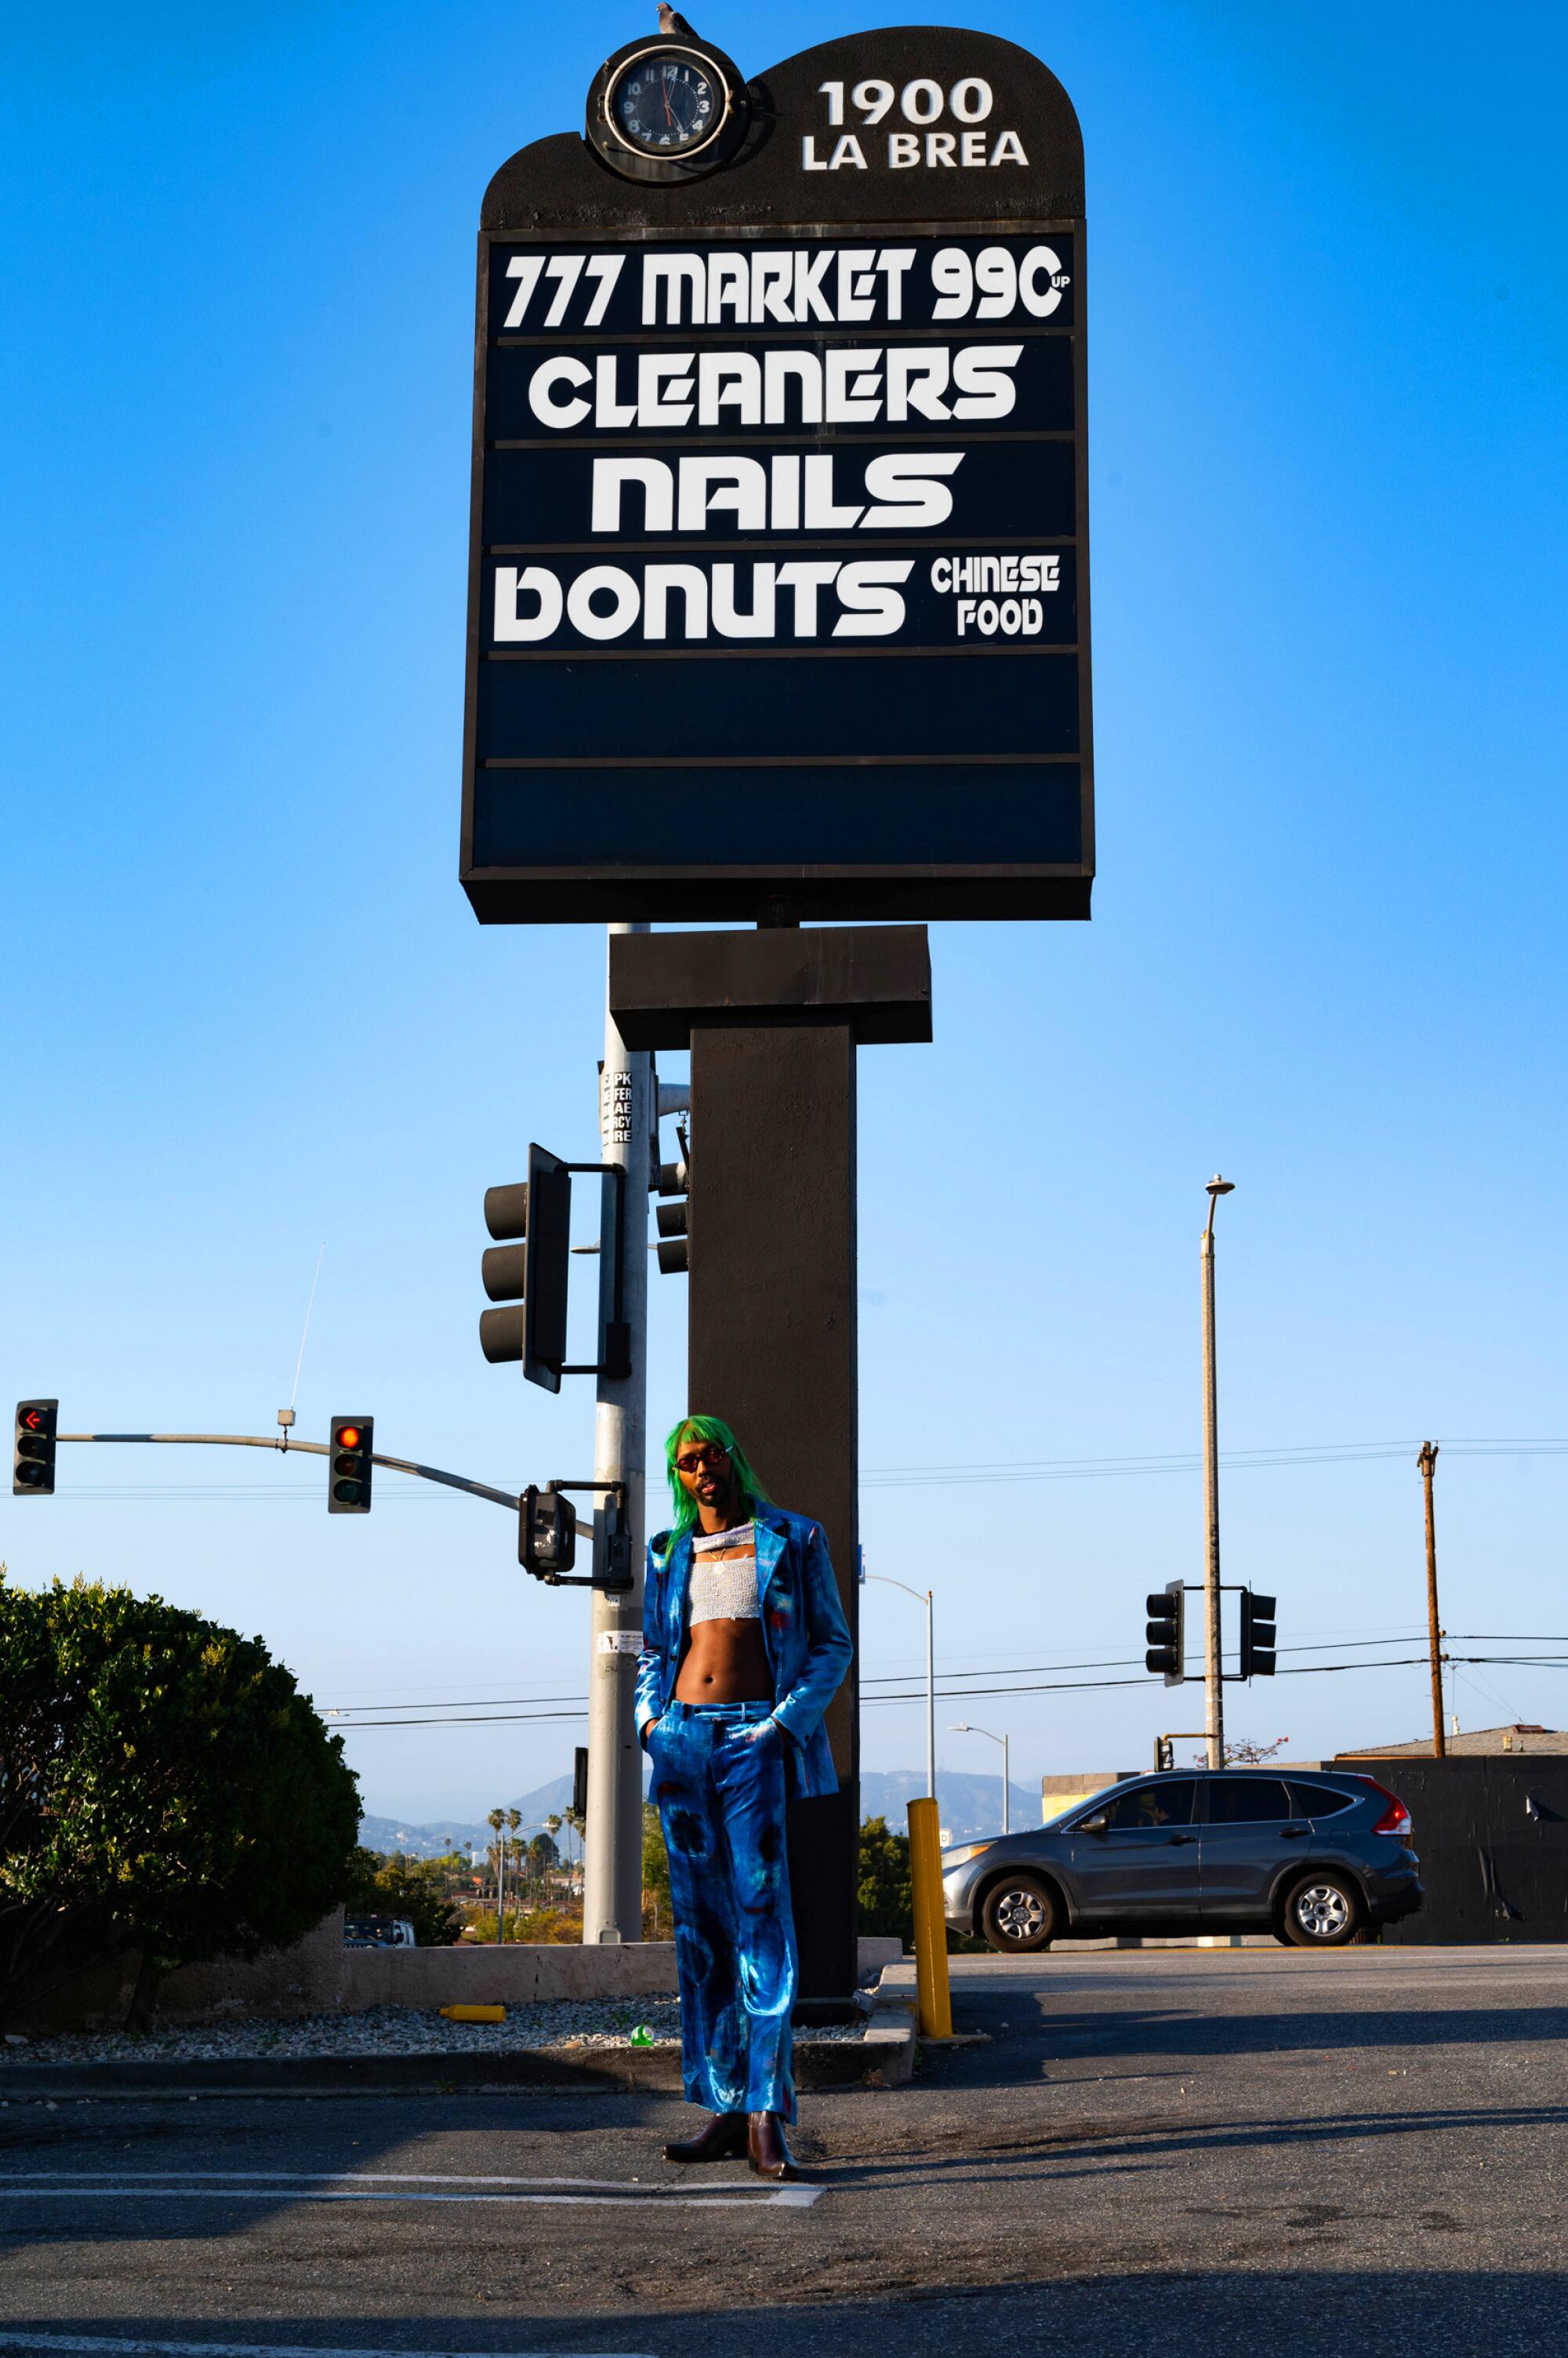 A person in a blue suit stands below a strip mall sign for 1900 La Brea.